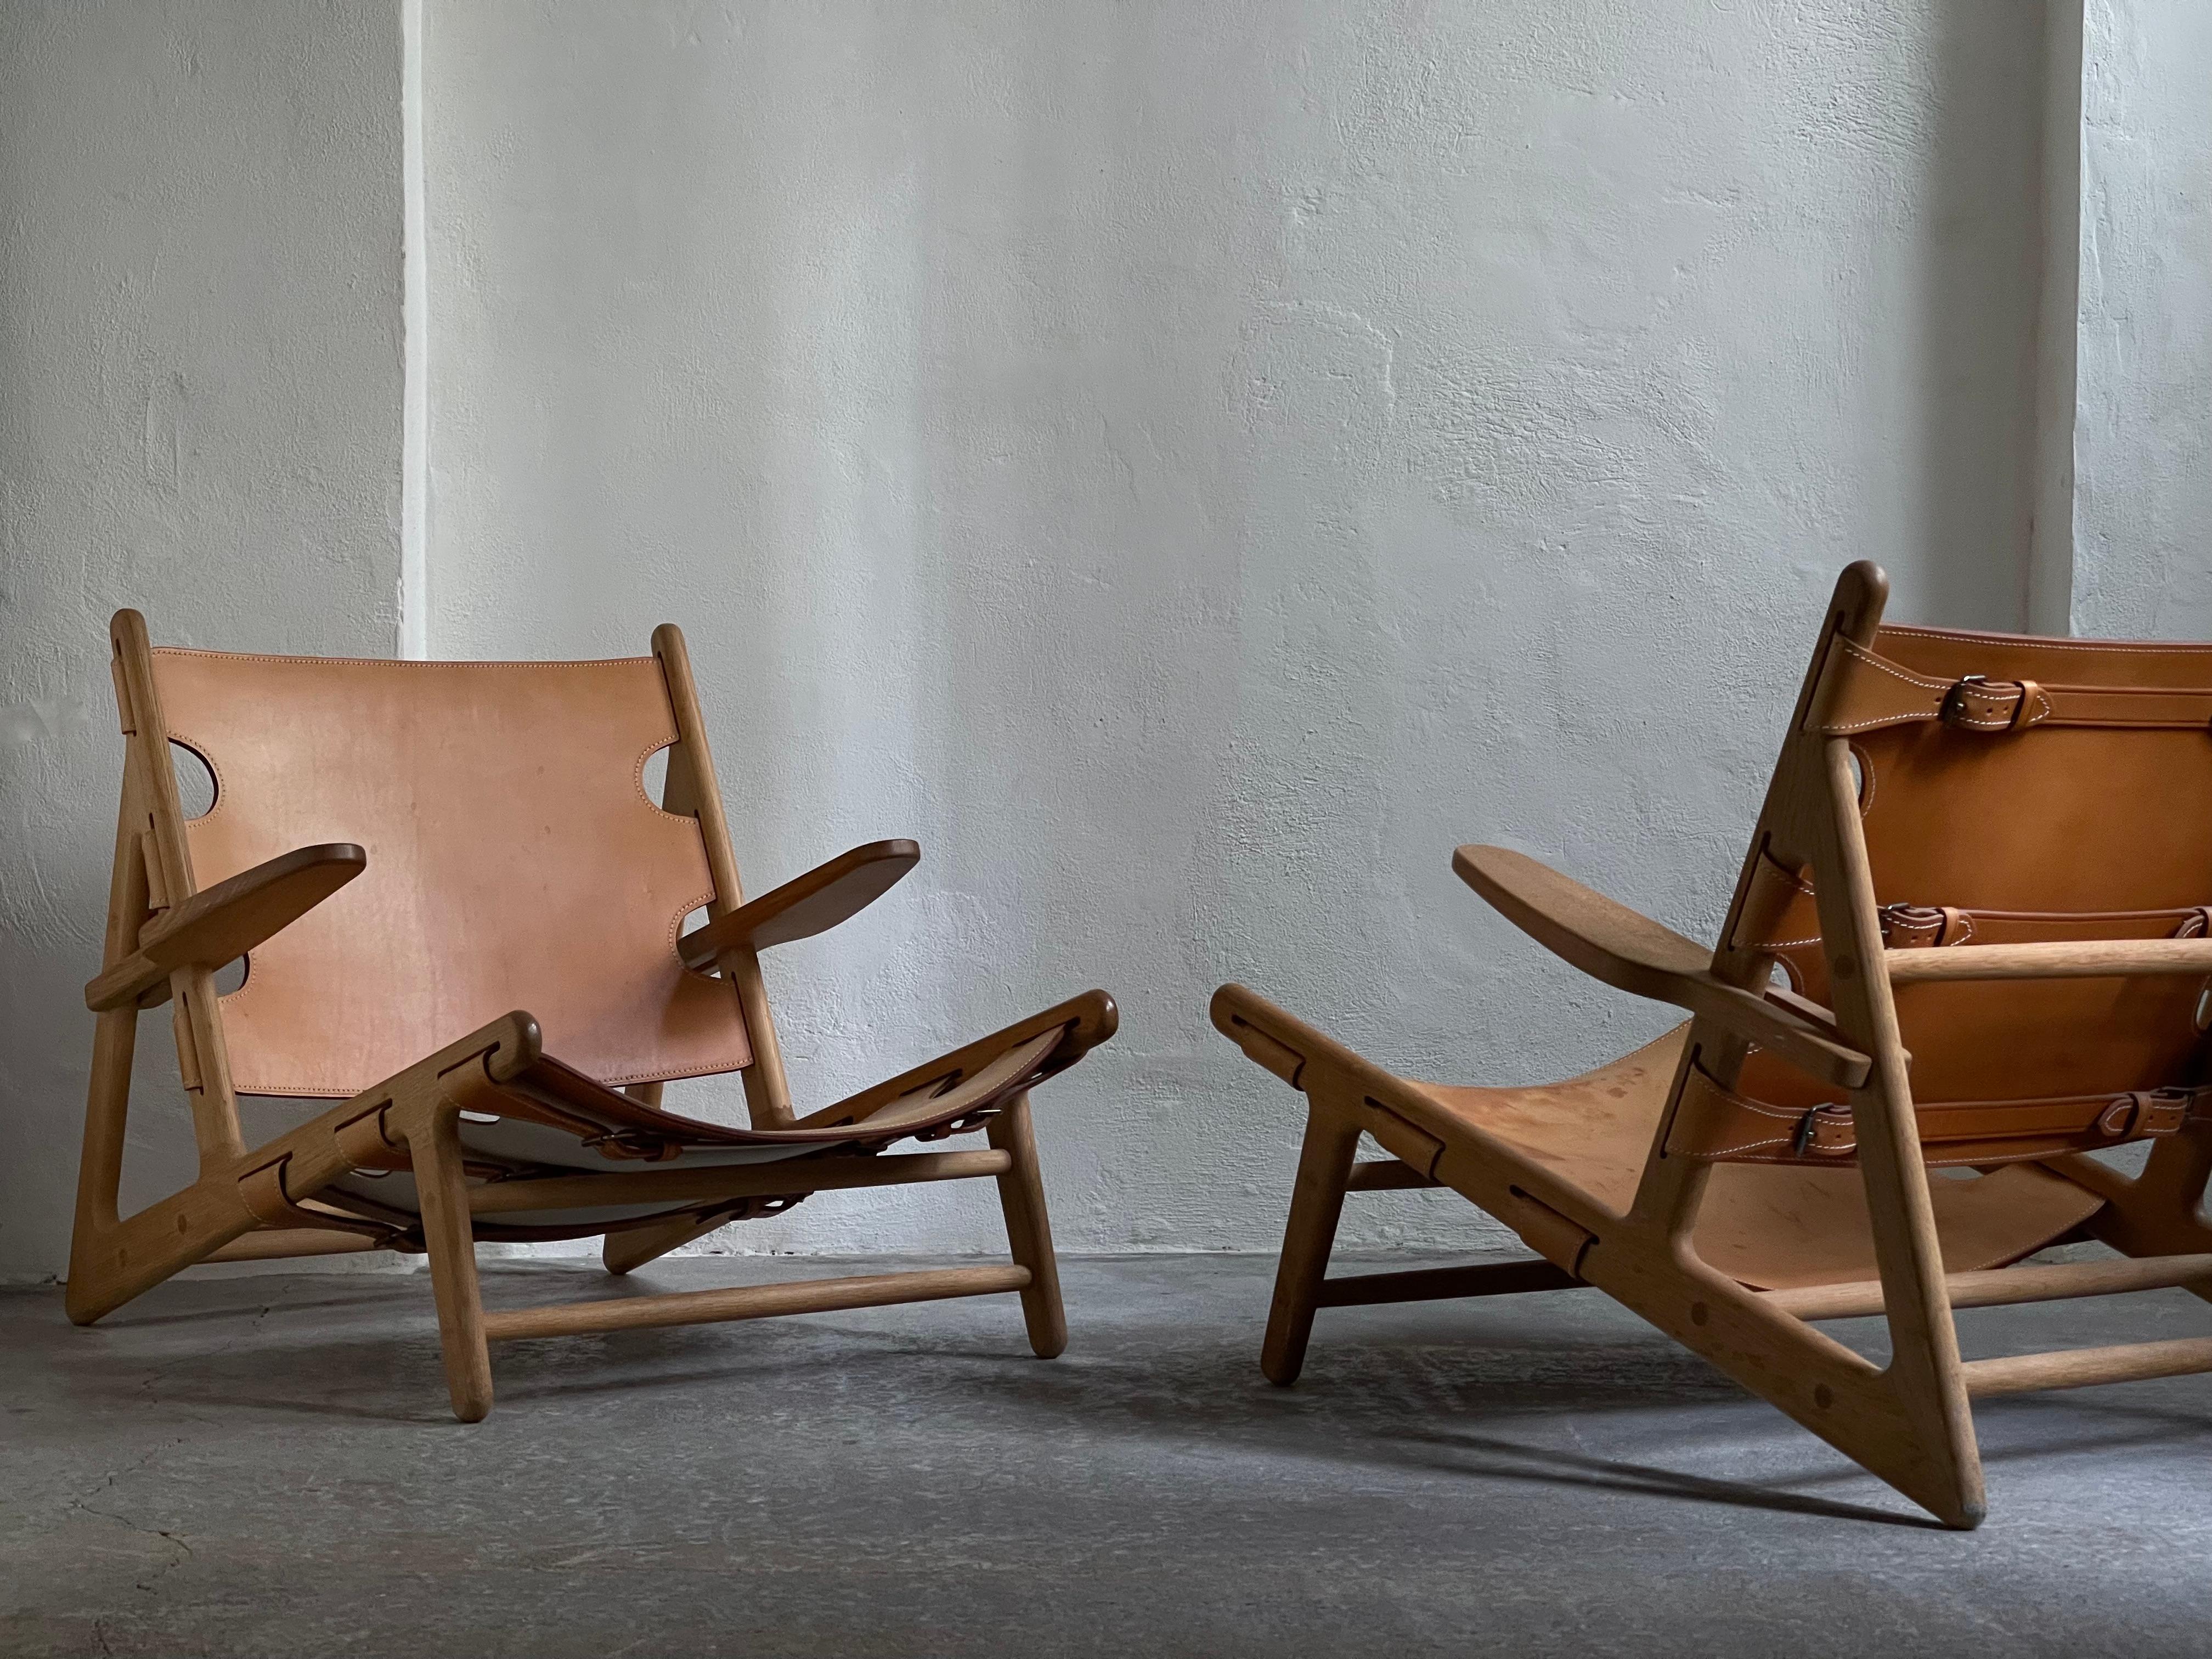 An elegant pair of Børge Mogensens hunting chairs beautifully worn and patinated saddle leather with a deep warm glow. Very good condition.

The Hunting Chair is one of Børge Mogensen’s most eye-catching chairs, designed in 1950. Seen from the